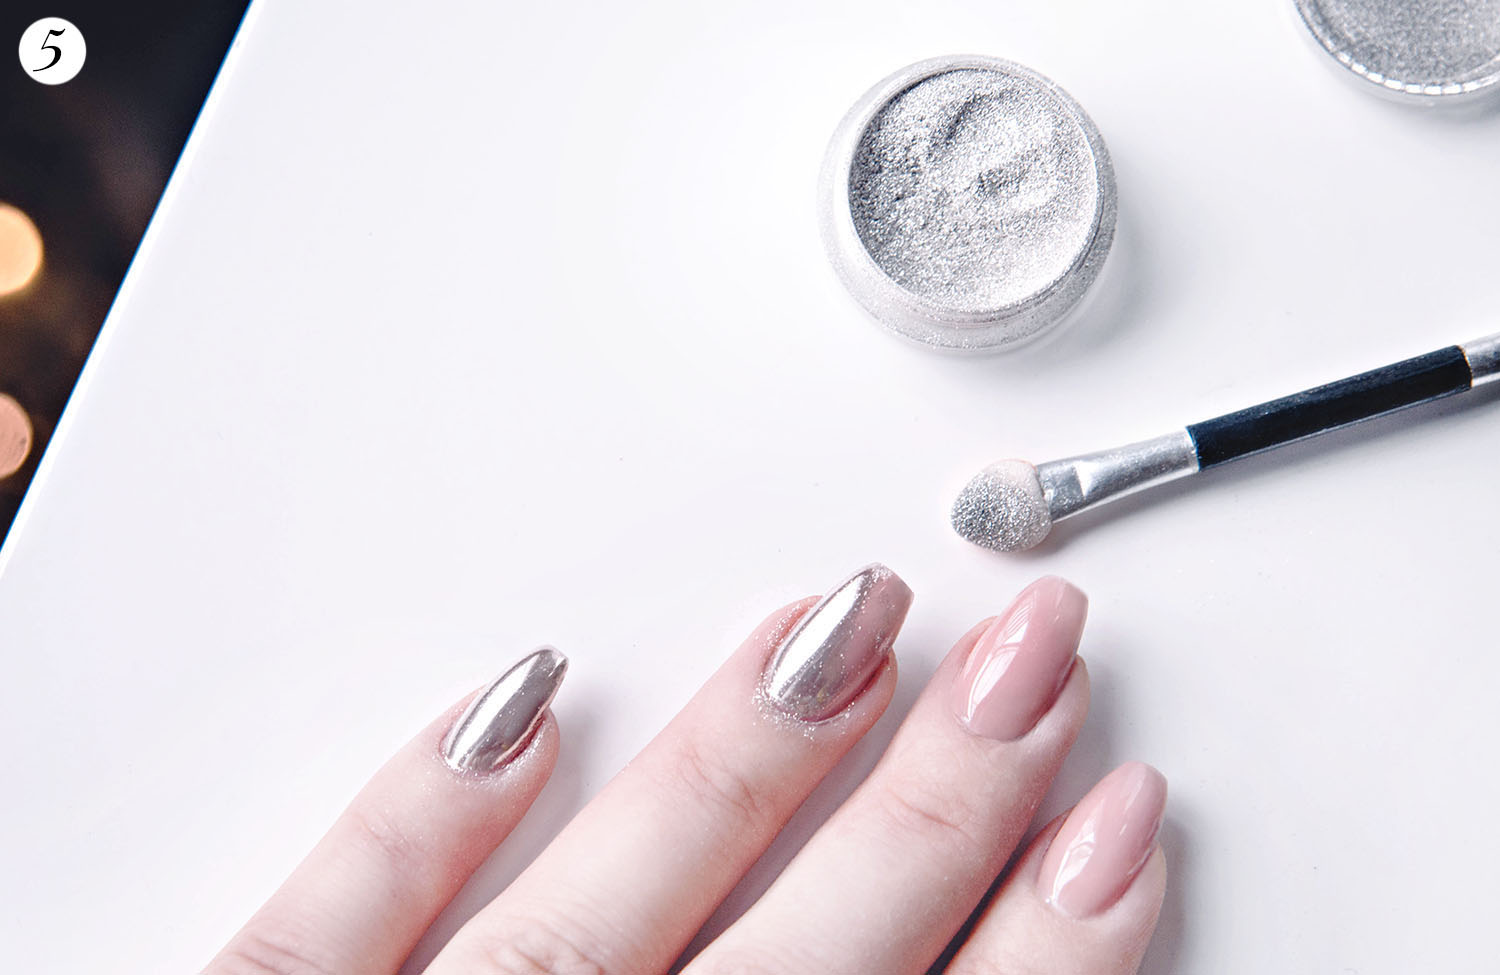 Chrome nails: How to do it at home - in 6 easy steps!